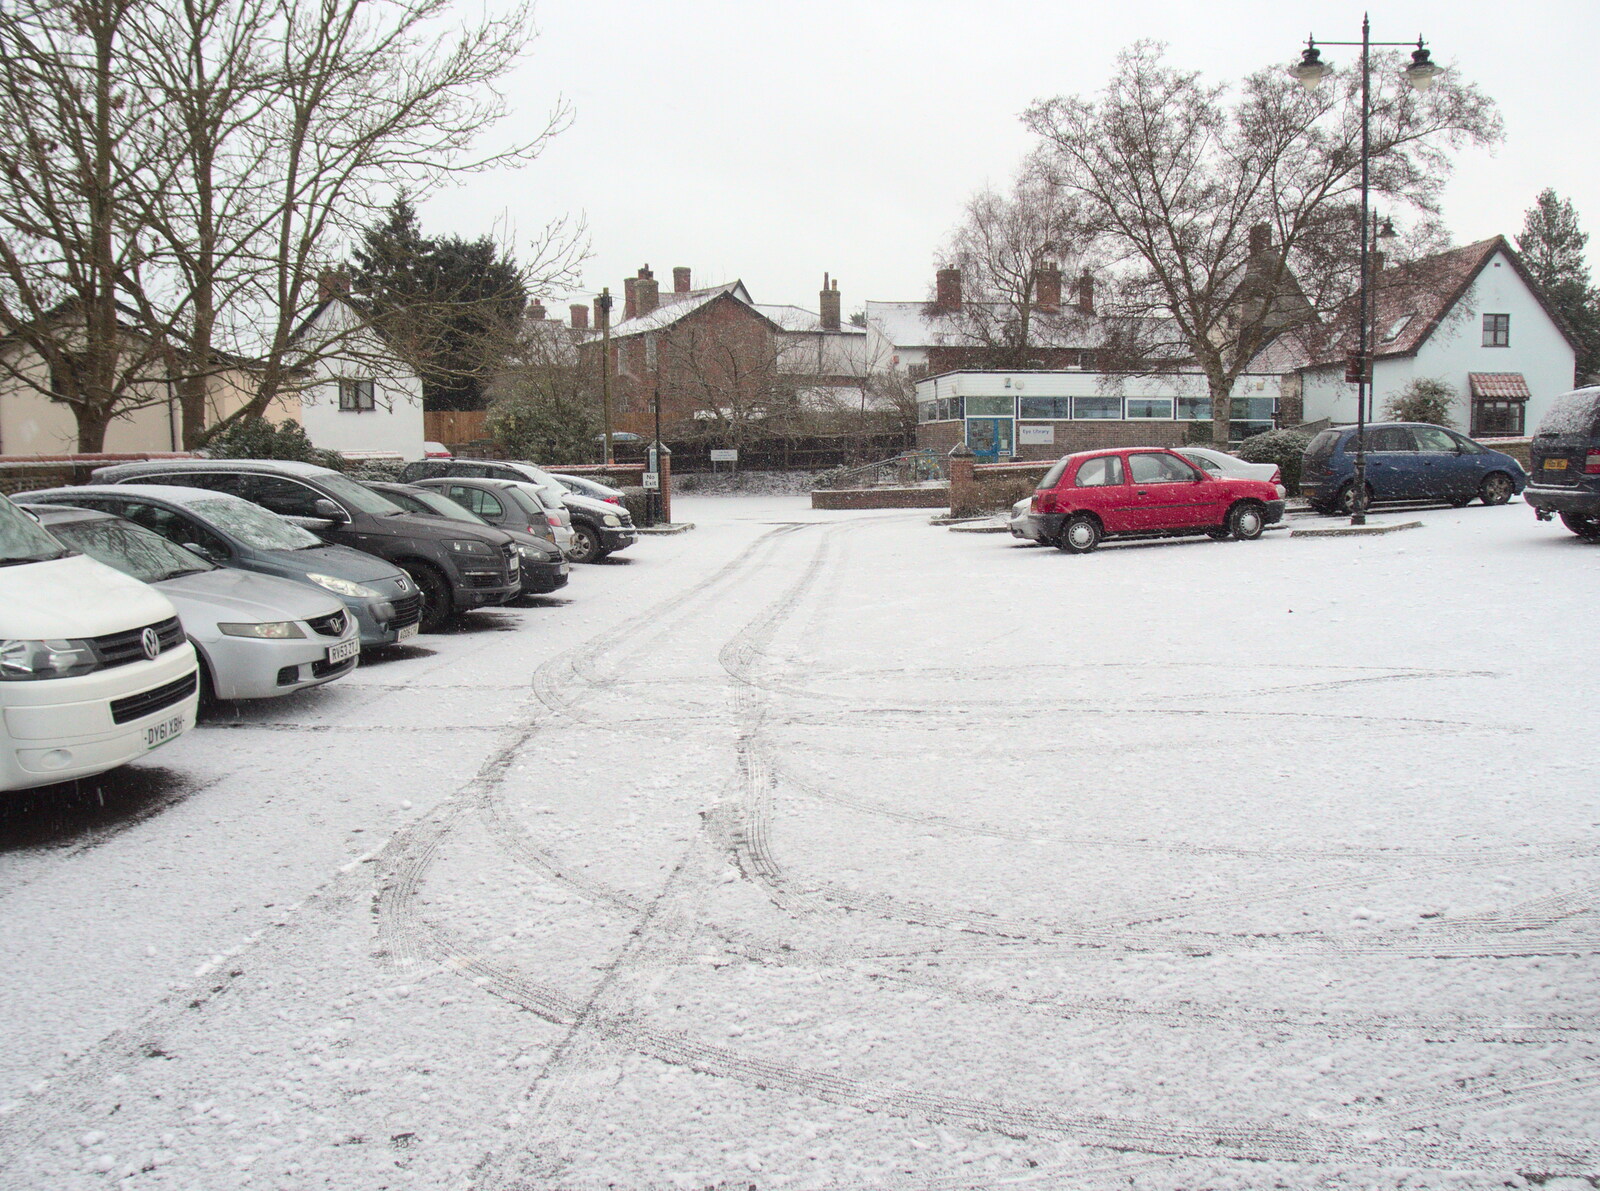 Snow covers the car park near the library from A Snowy January Miscellany, Eye, Suffolk - 15th January 2017